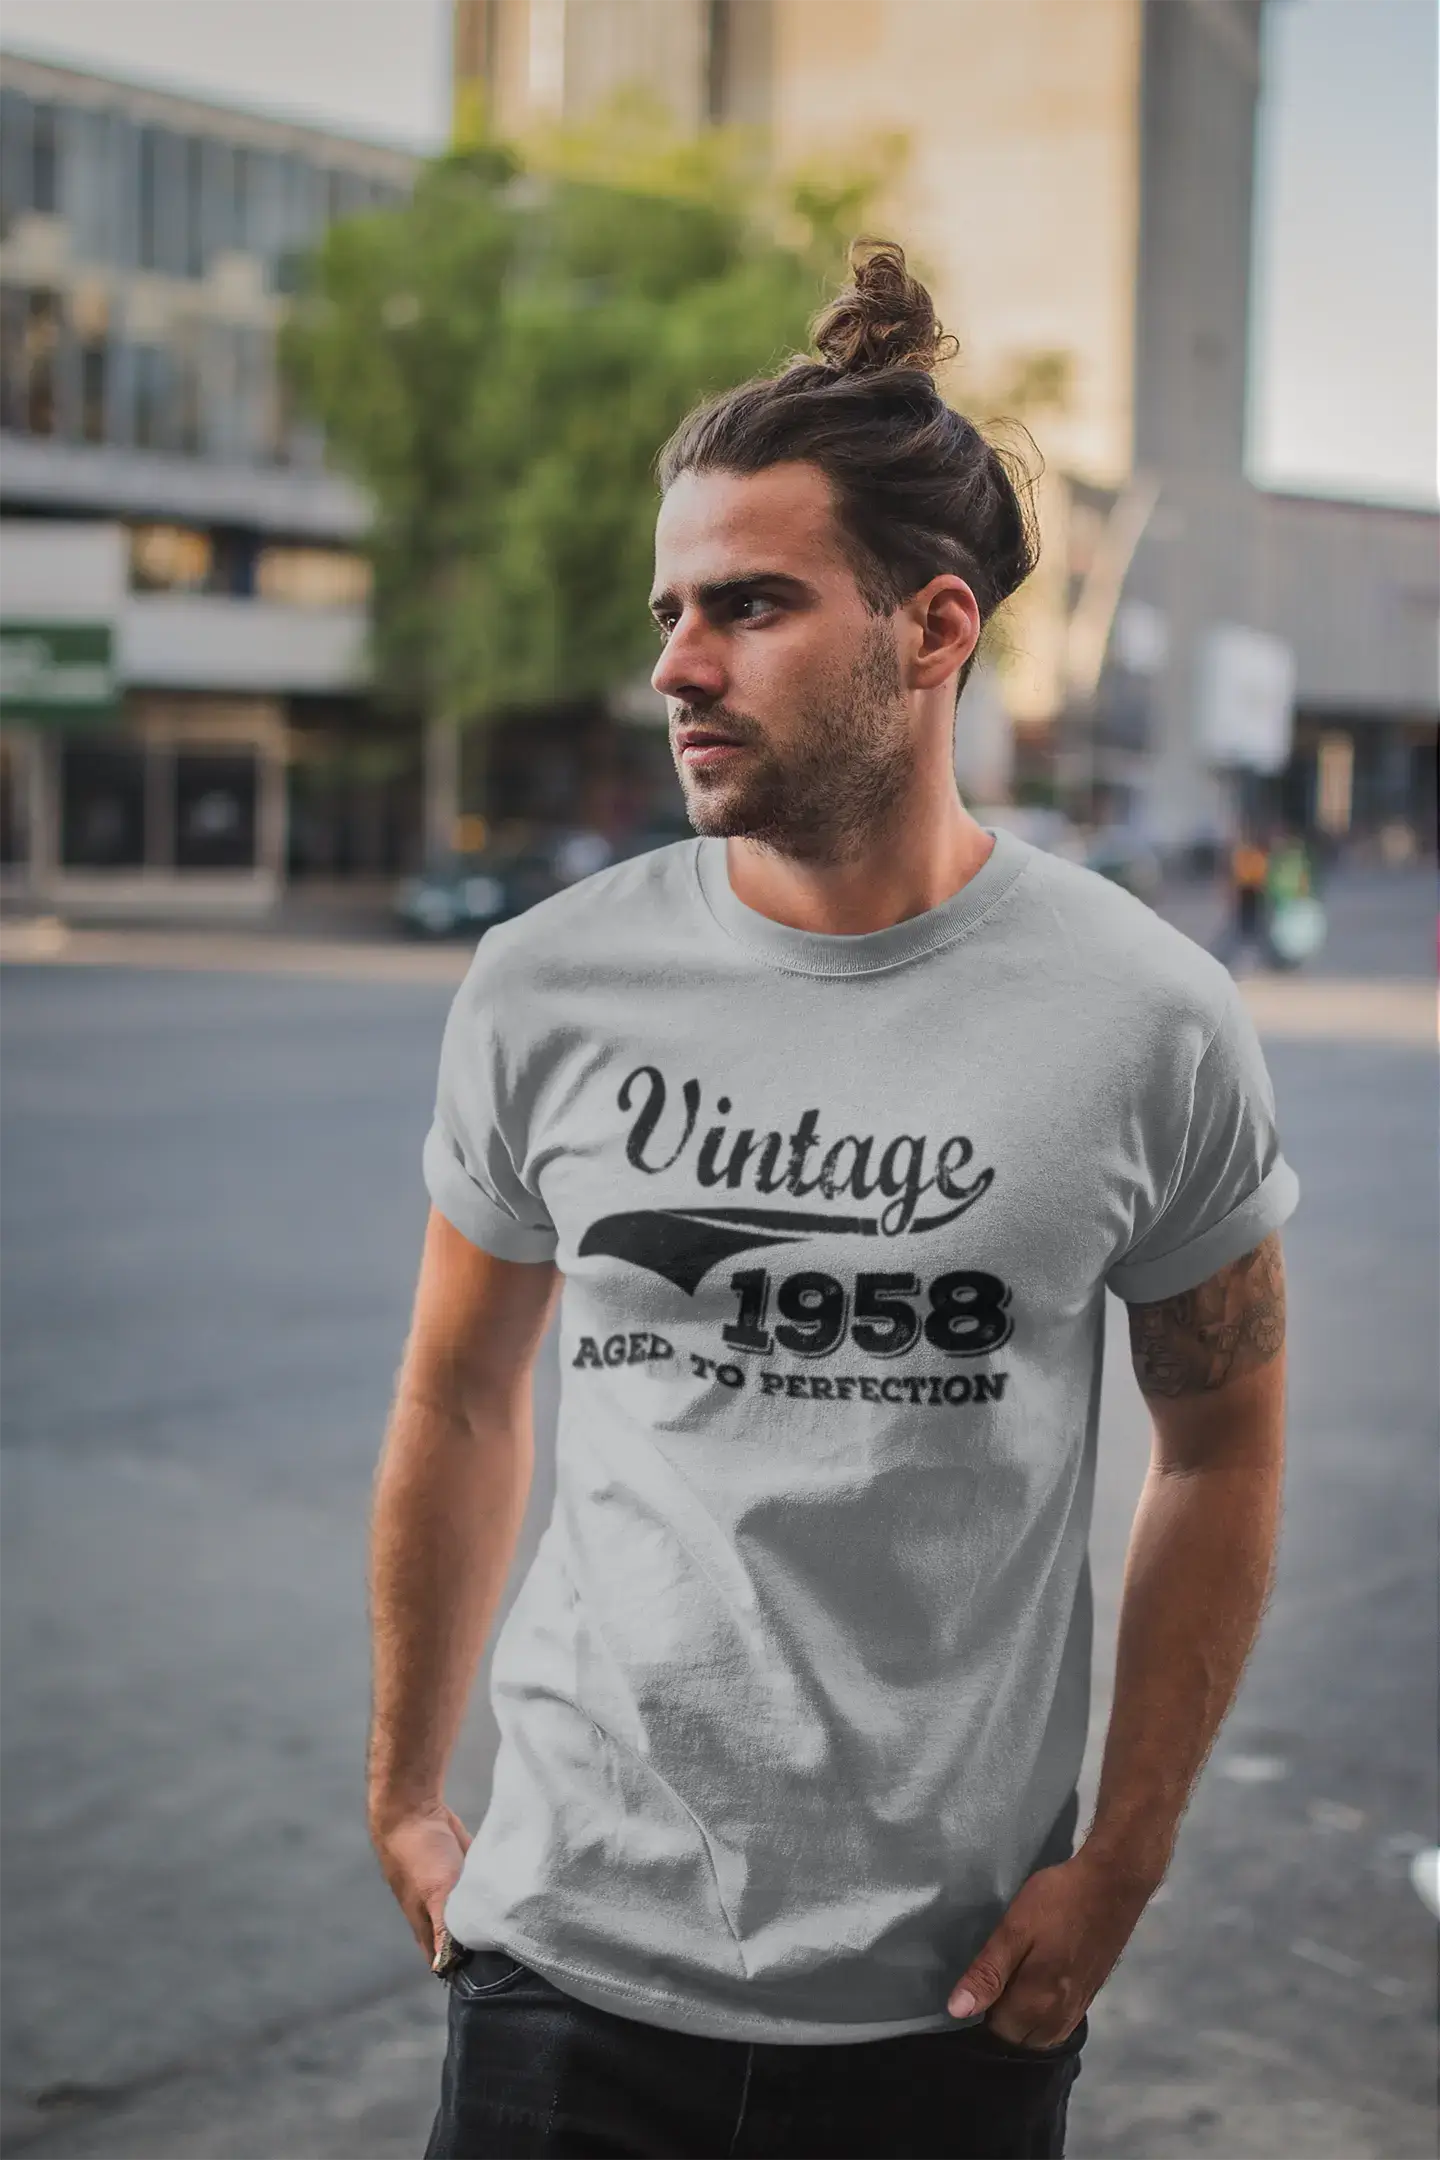 Vintage Aged to Perfection 1958, Grey, Men's Short Sleeve Round Neck T-shirt, gift t-shirt 00346